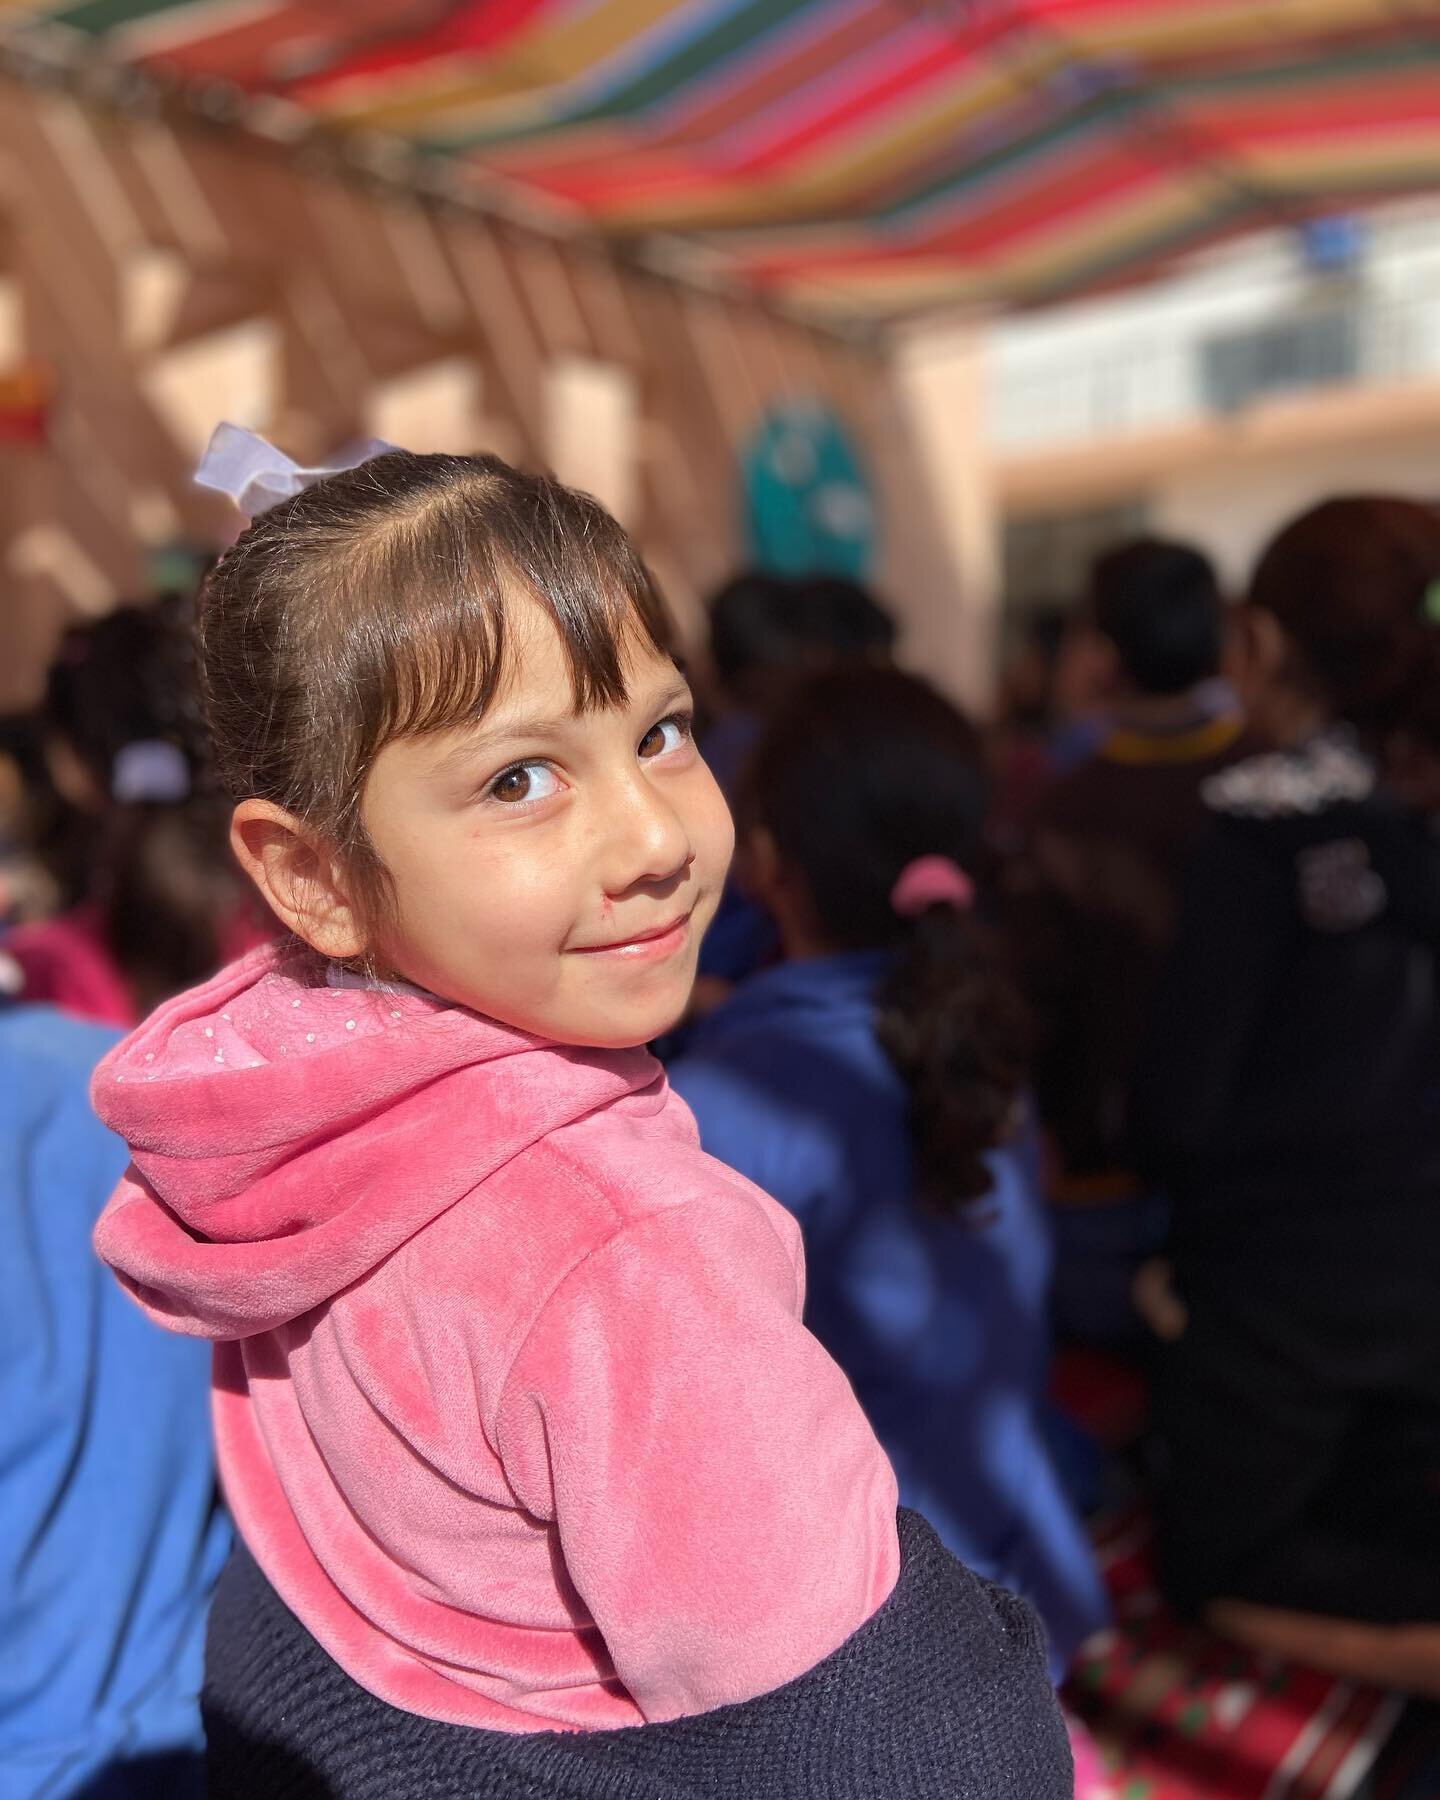 We appreciate your visit to the Azraq education center, @magicforsmiles !! Everyone, without exception, had smiles on their faces because to you! You are always welcome and we appreciate you.

#azraq #jordan #syrians #2023 #school #eduaction #love #g